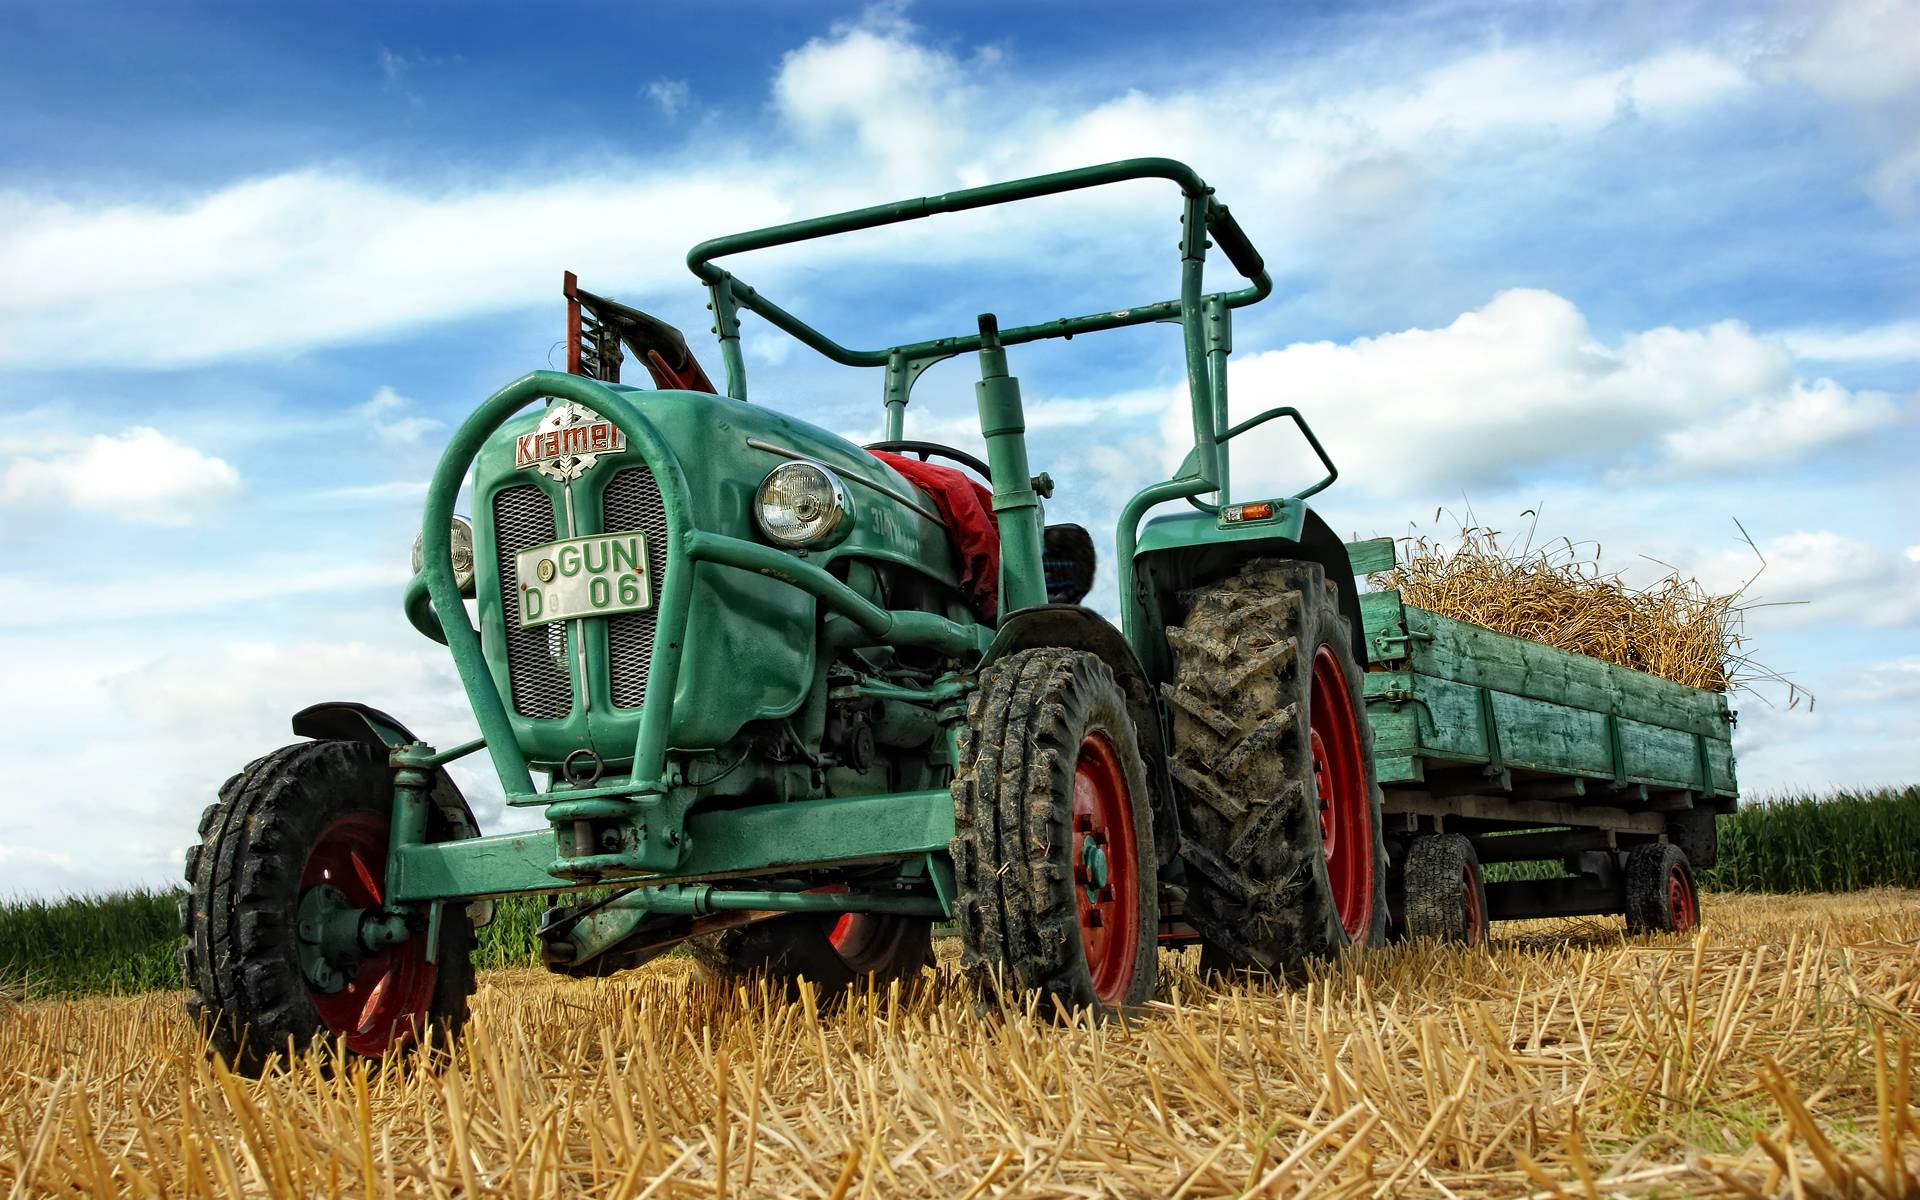 Download Tractor 7448 1920x1200 px High Resolution Wallpaper